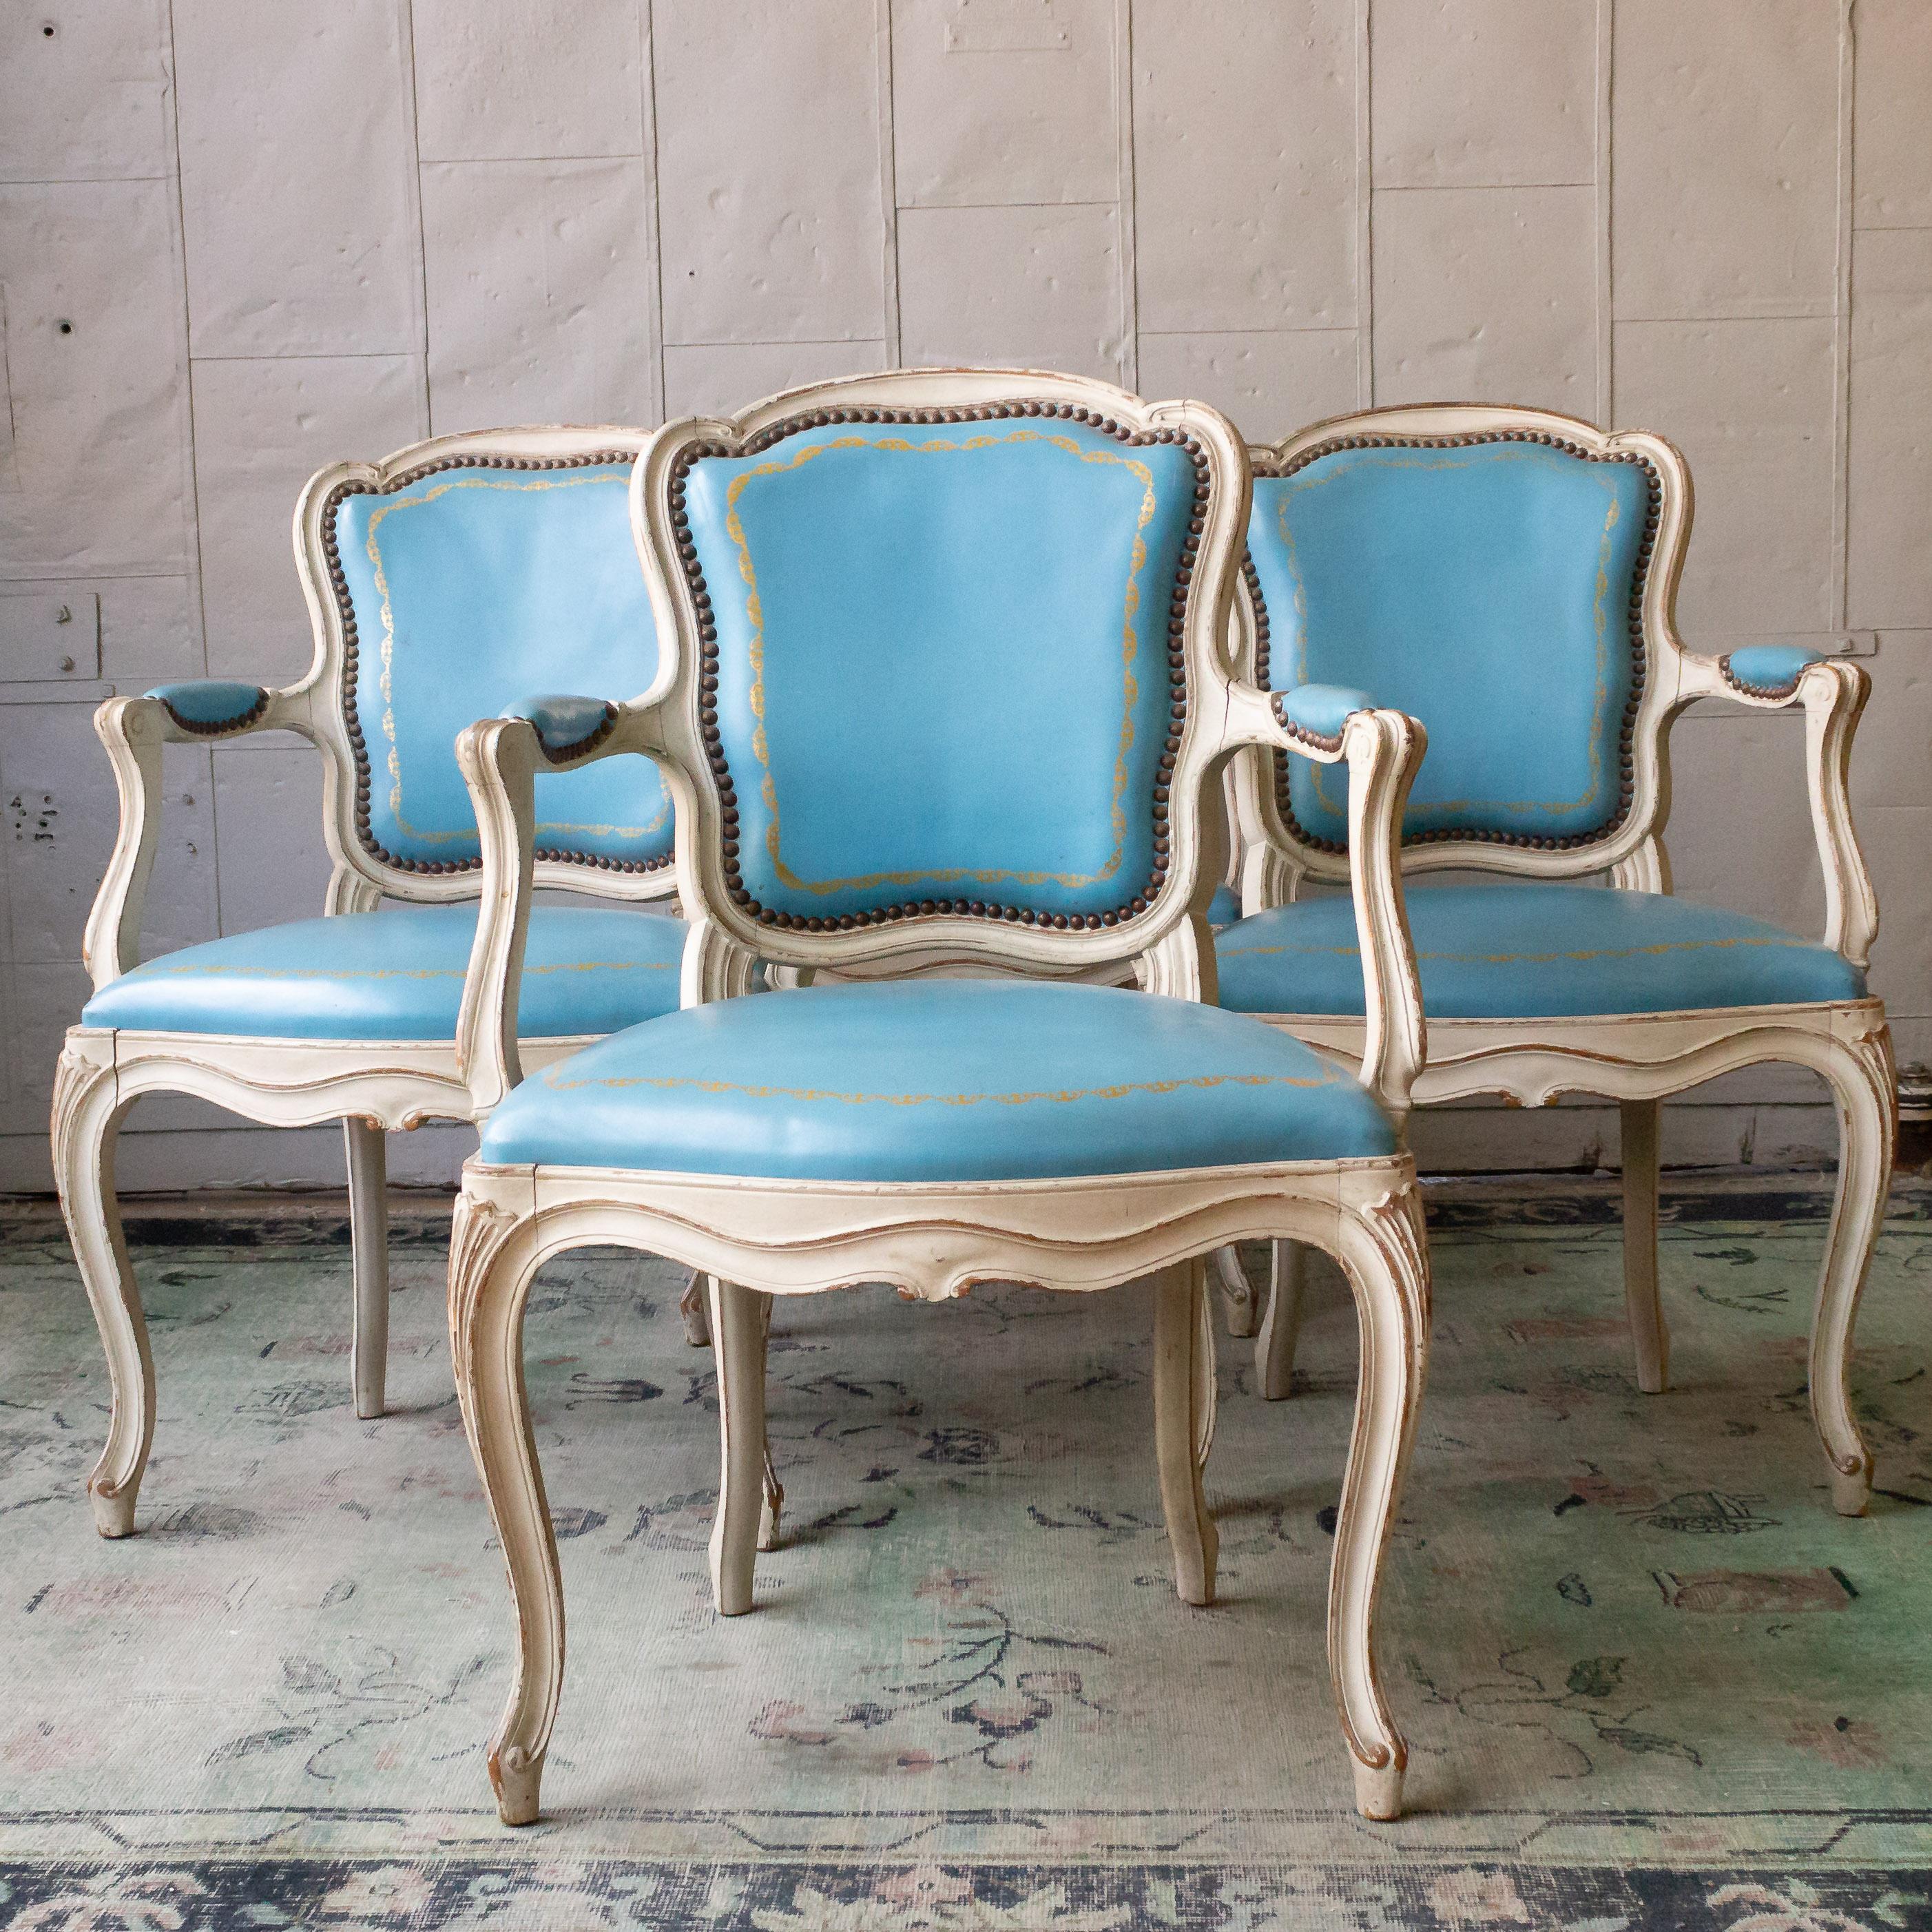 An elegant set of four Louis XV style armchairs in light blue leather and white patinated frames. With this alluring combination of classic French design and rich blue leather upholstery, these chairs are ideal to make a distinctive touch to your